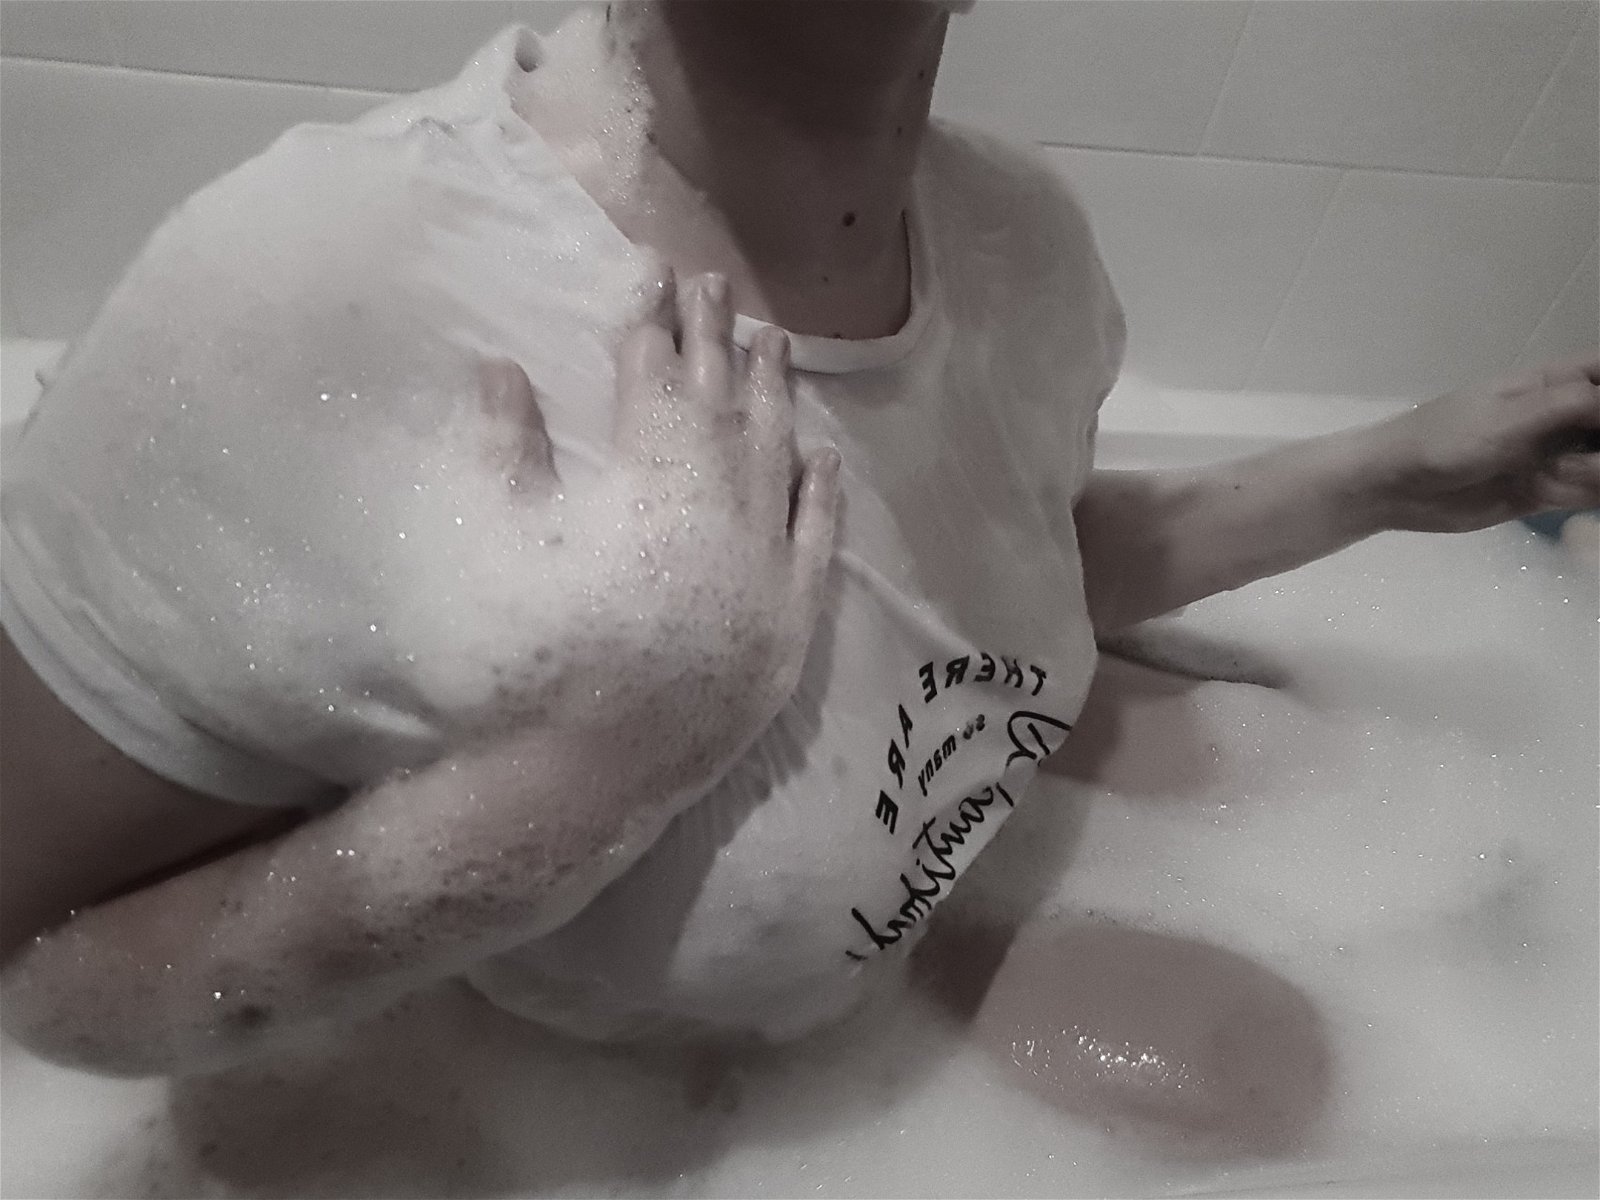 Photo by thequeenofdarkness with the username @thequeenofdarkness, who is a star user,  January 9, 2021 at 4:23 AM and the text says 'who dosnt love a wet top 




#wettop #whitewettop #bath #bubblebath #bathtime #wetbody #sexybabe #girlinthebath #sexybathgirl #wettopchallange #onlyfansbabe #onlyfansgirl #hotbath #hotbabe #allwet'